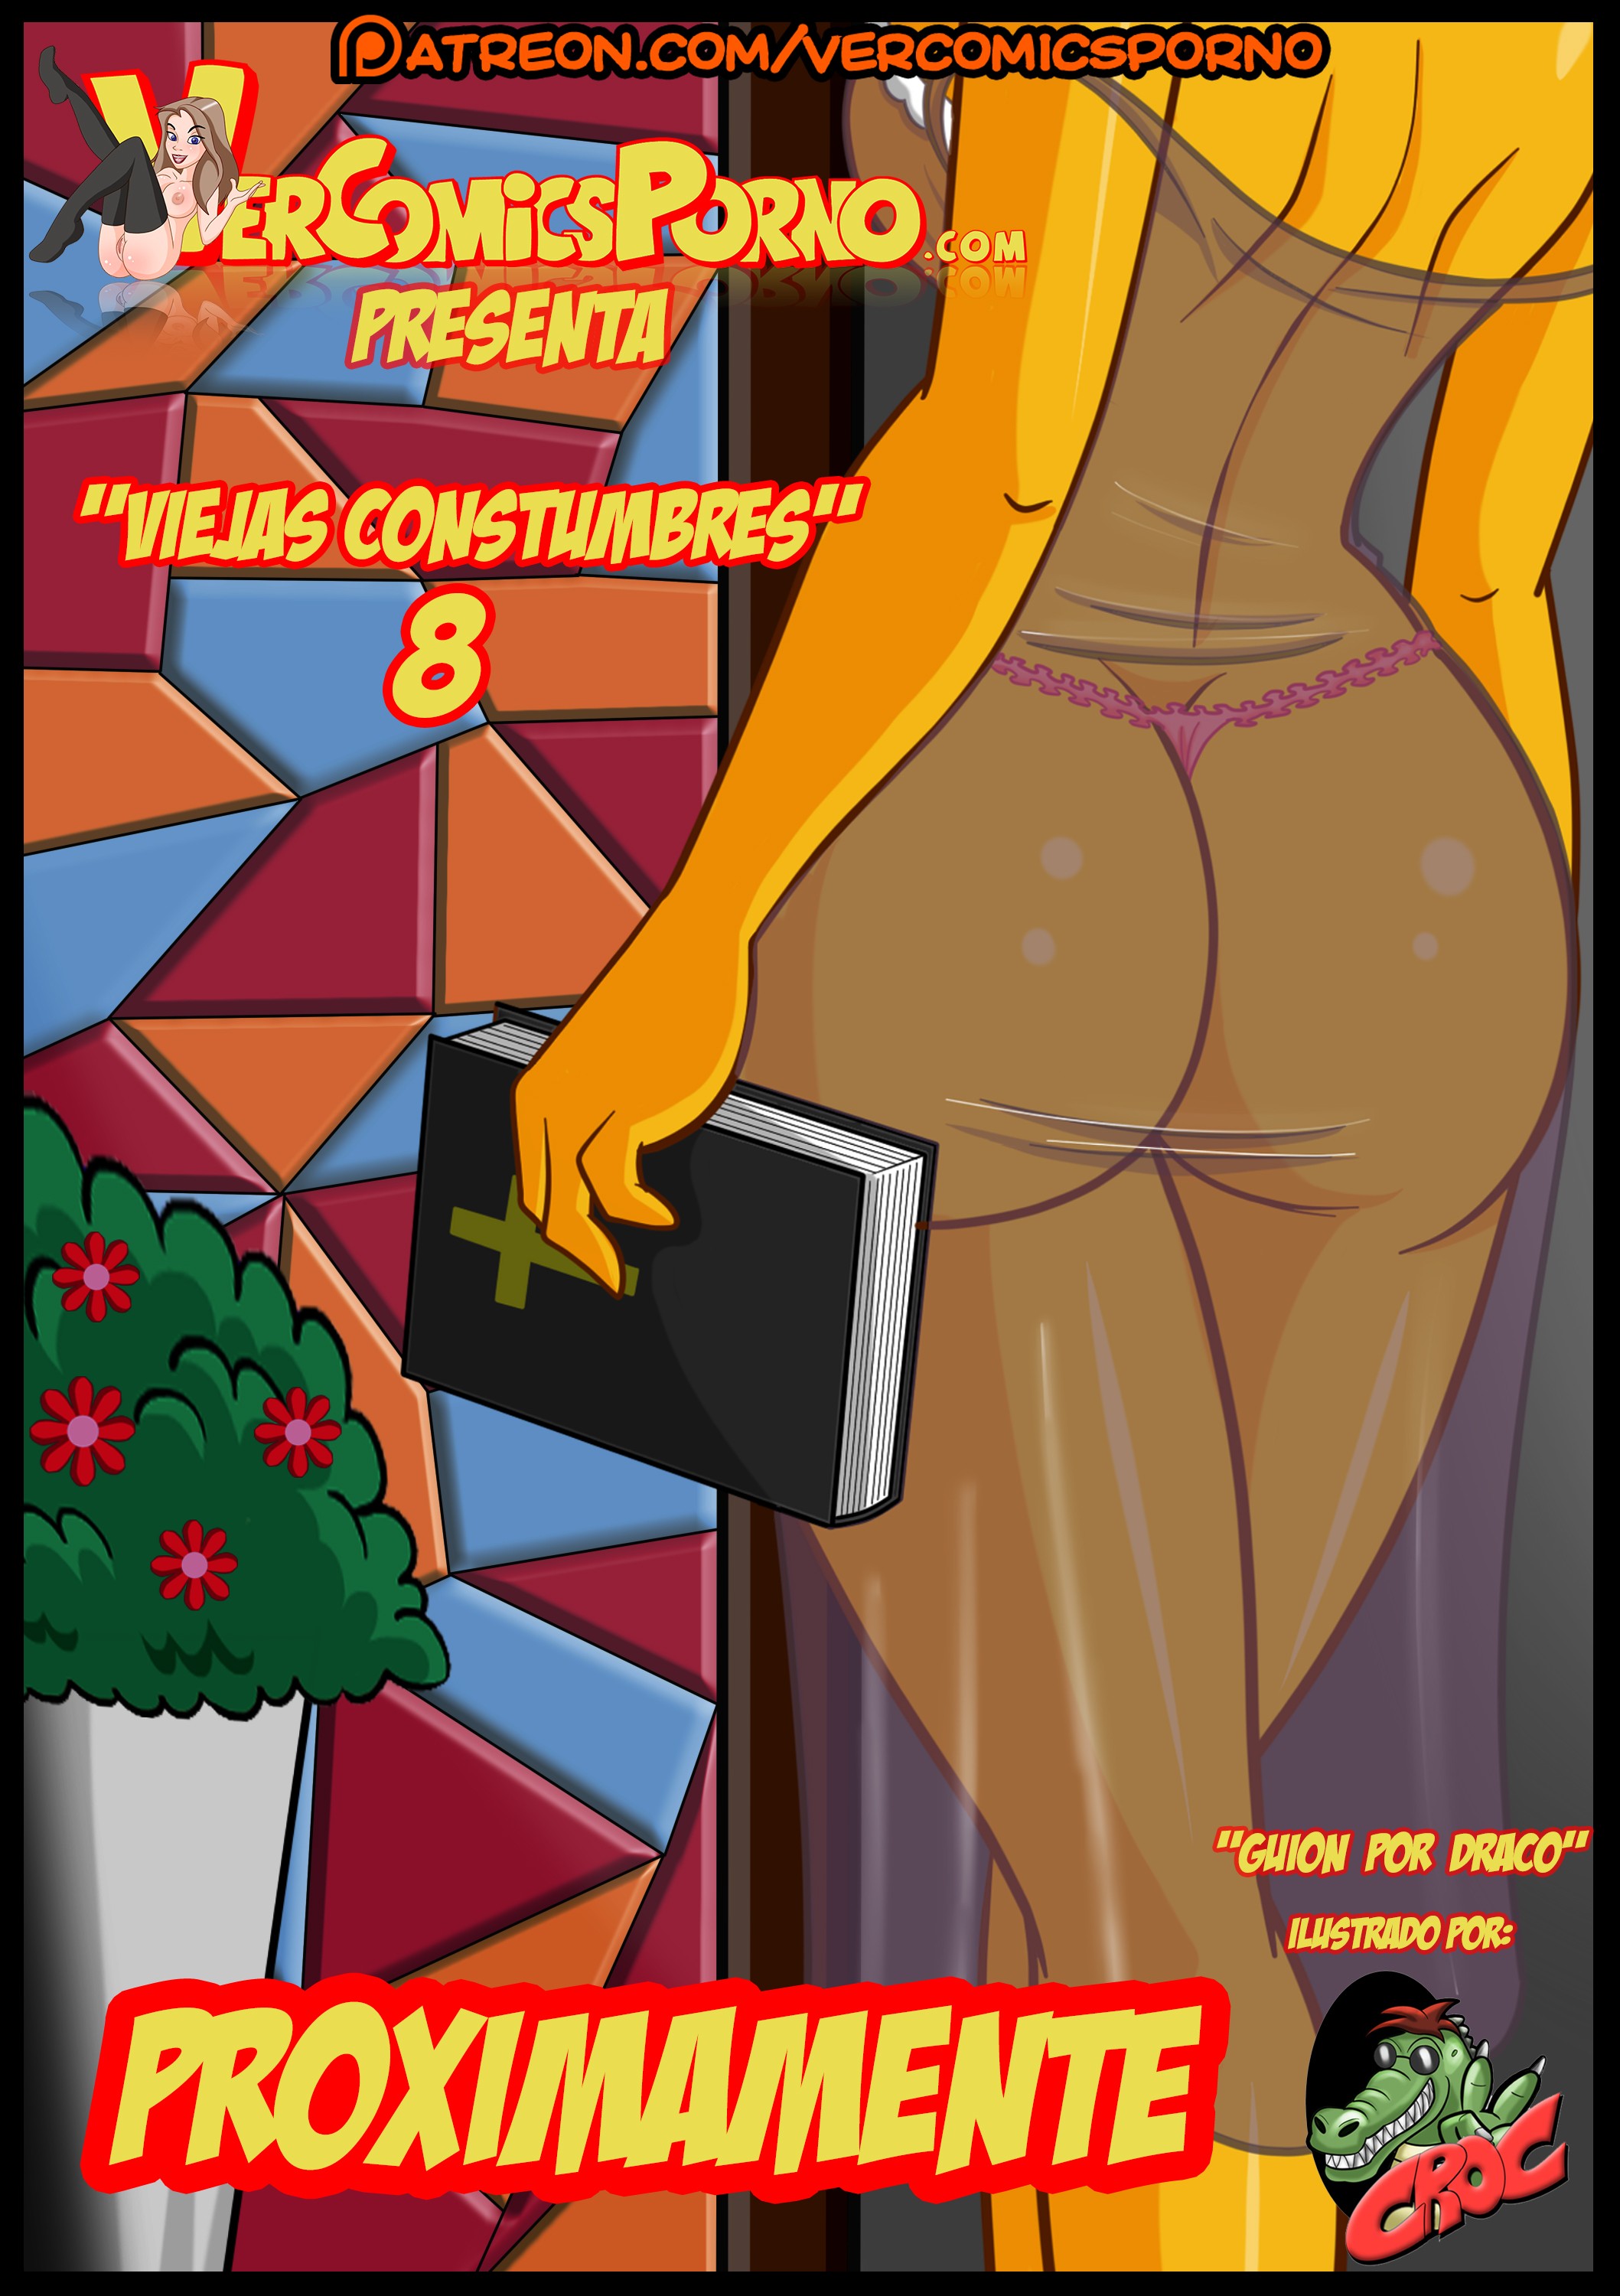 Proximamente - Viejas costumbres - Old Habits 8 by Croc - 37 pages - Ongoing